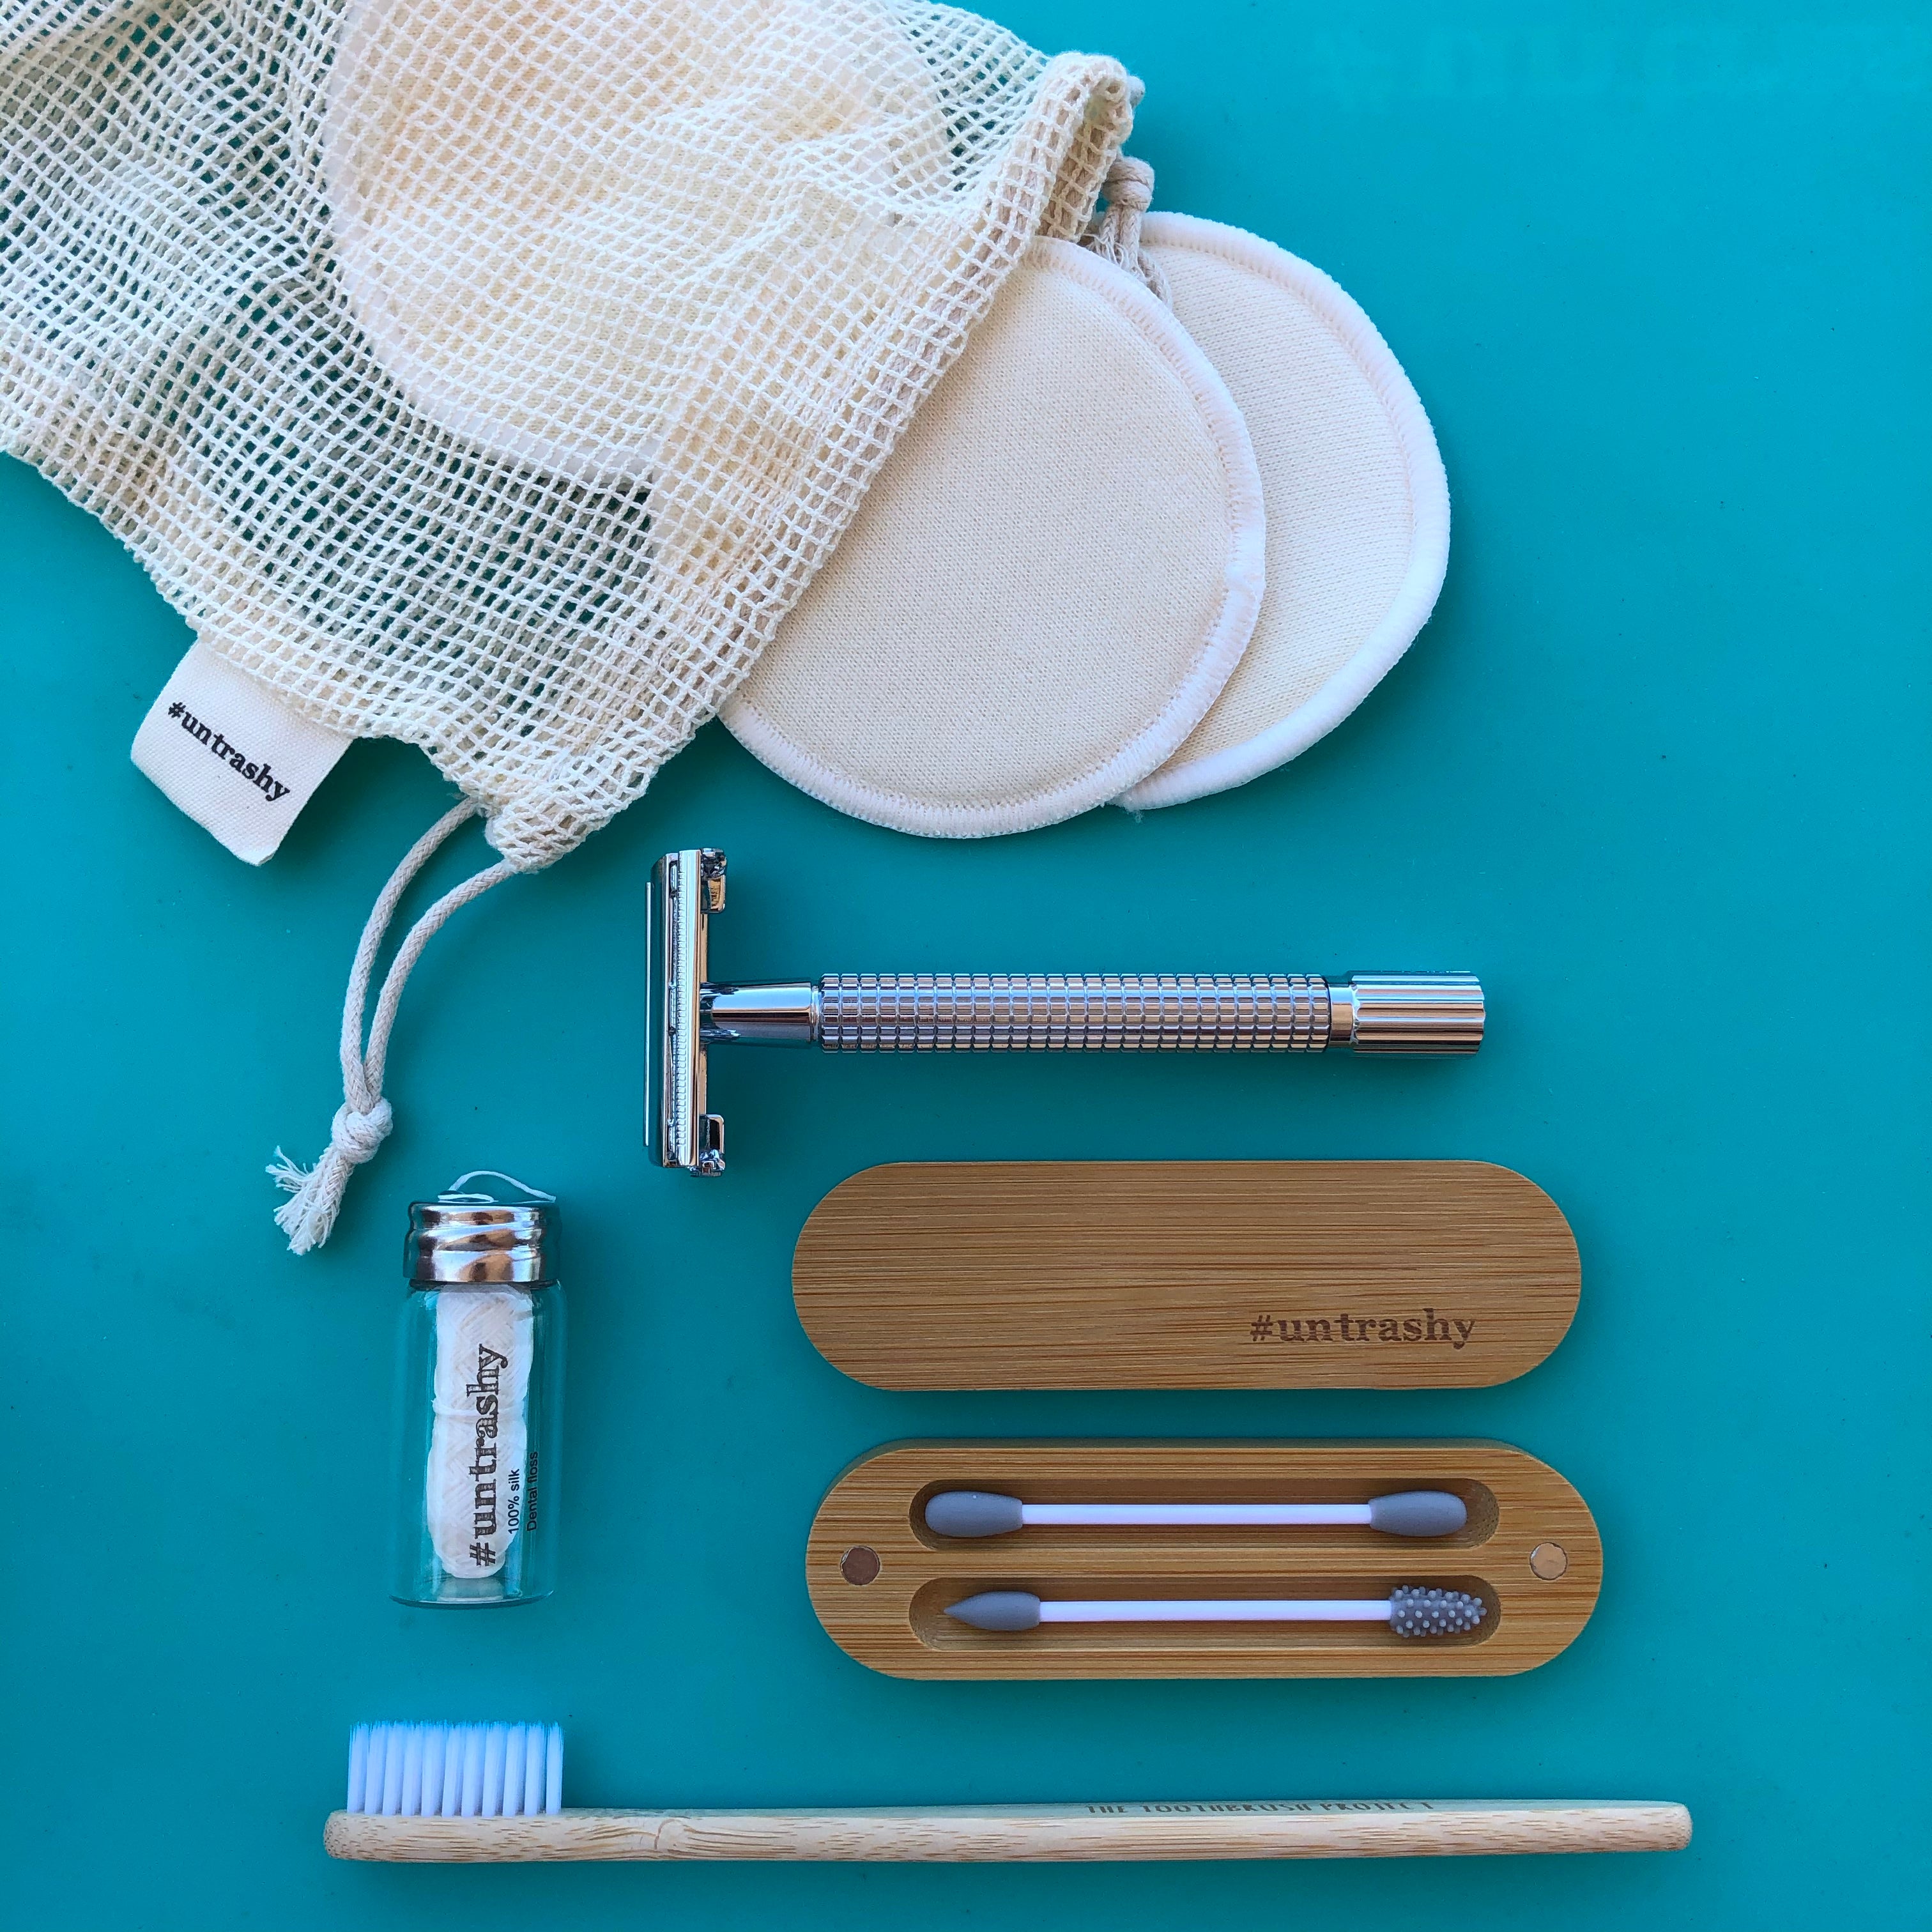 variety of beauty products on a teal background